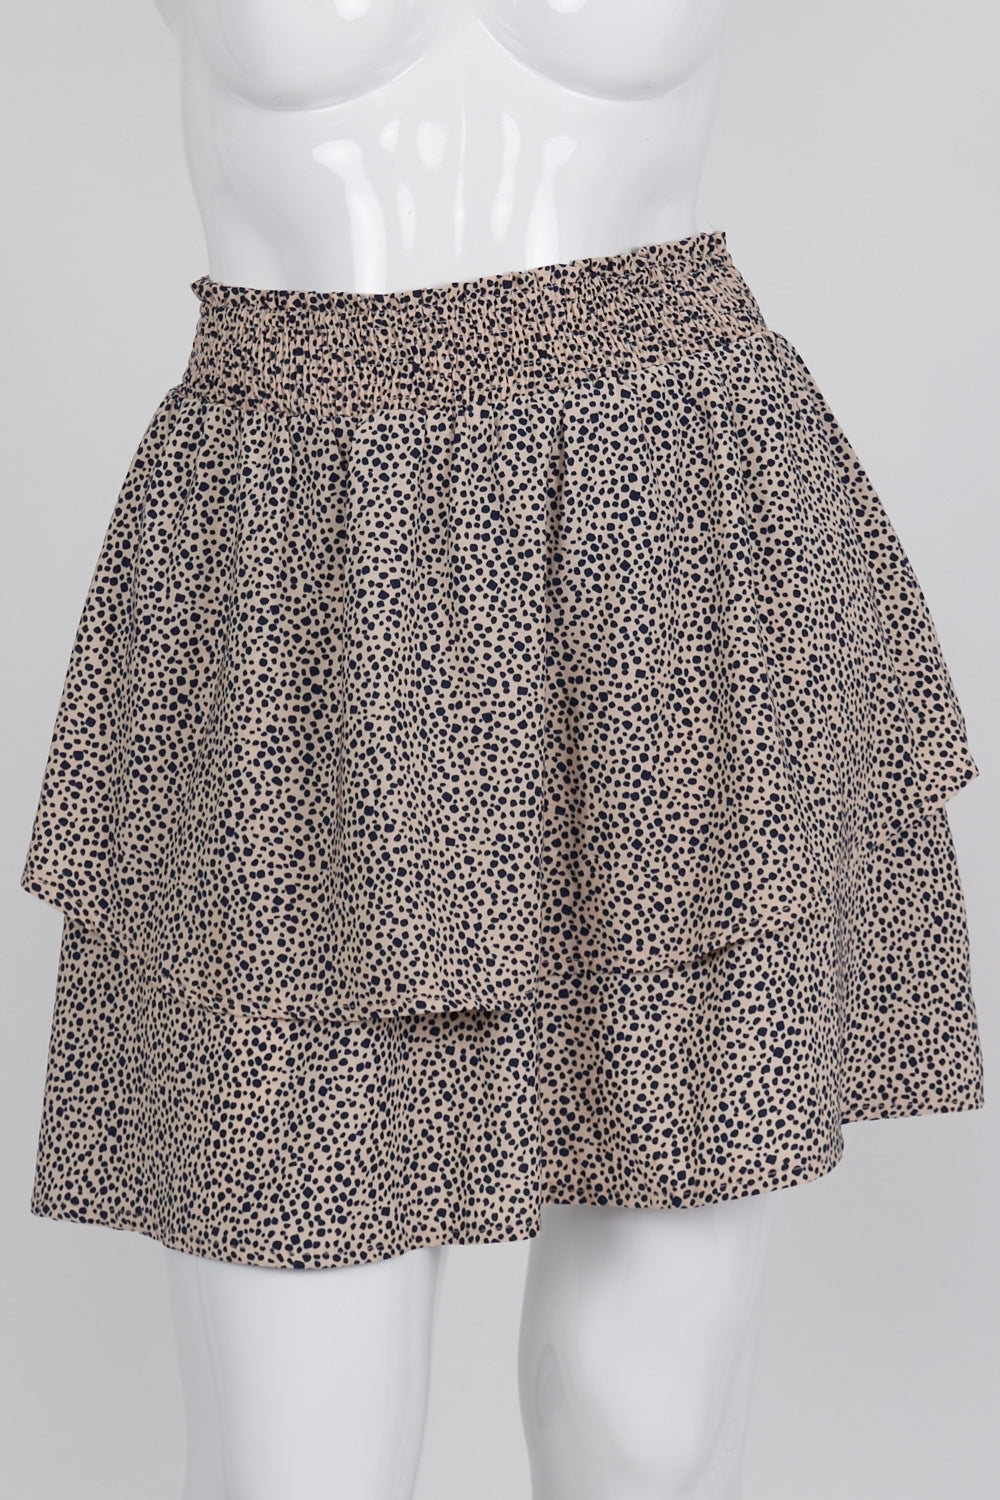 Grace &amp; Co Pink Patterned Layered Skirt 12